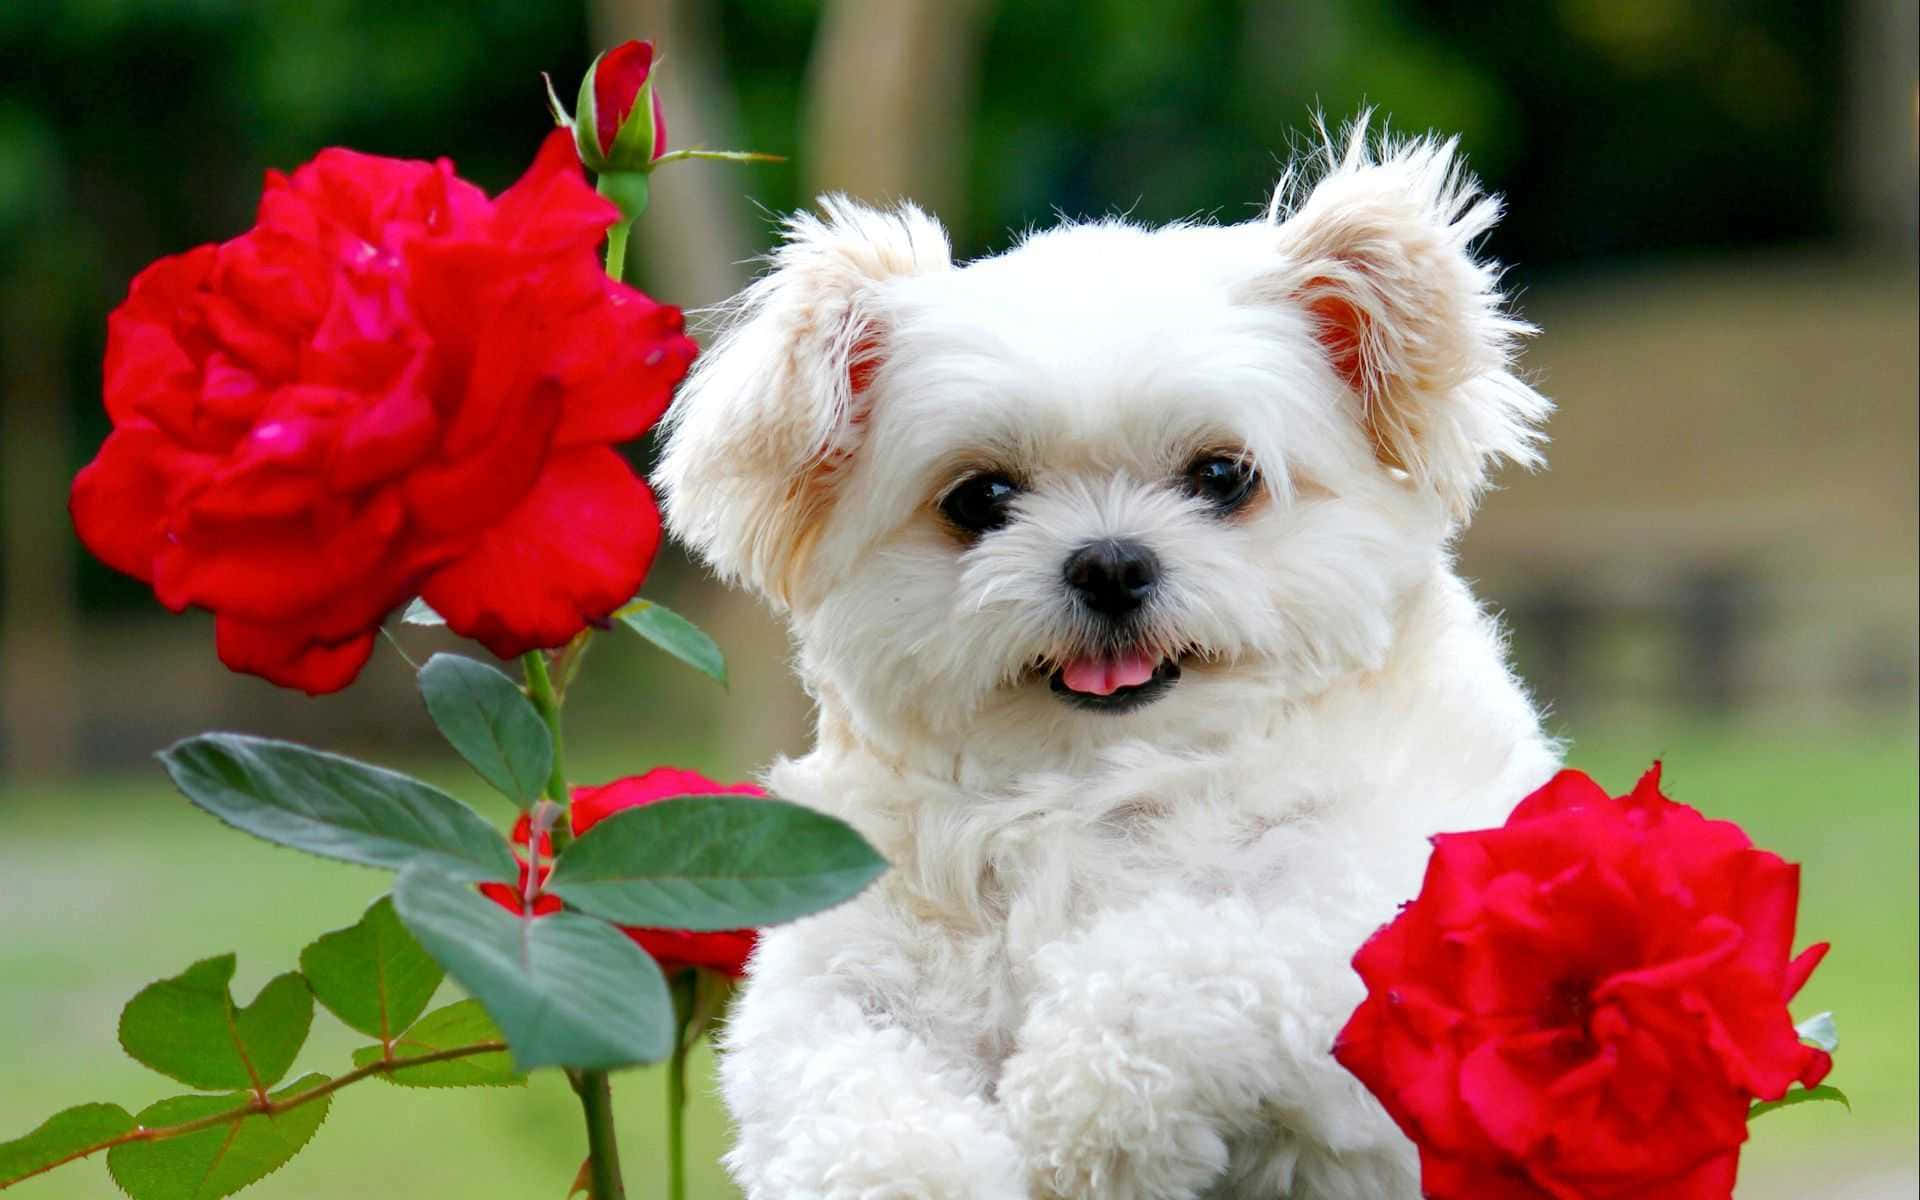 Cute and Cuddly Pink Puppies Wallpaper